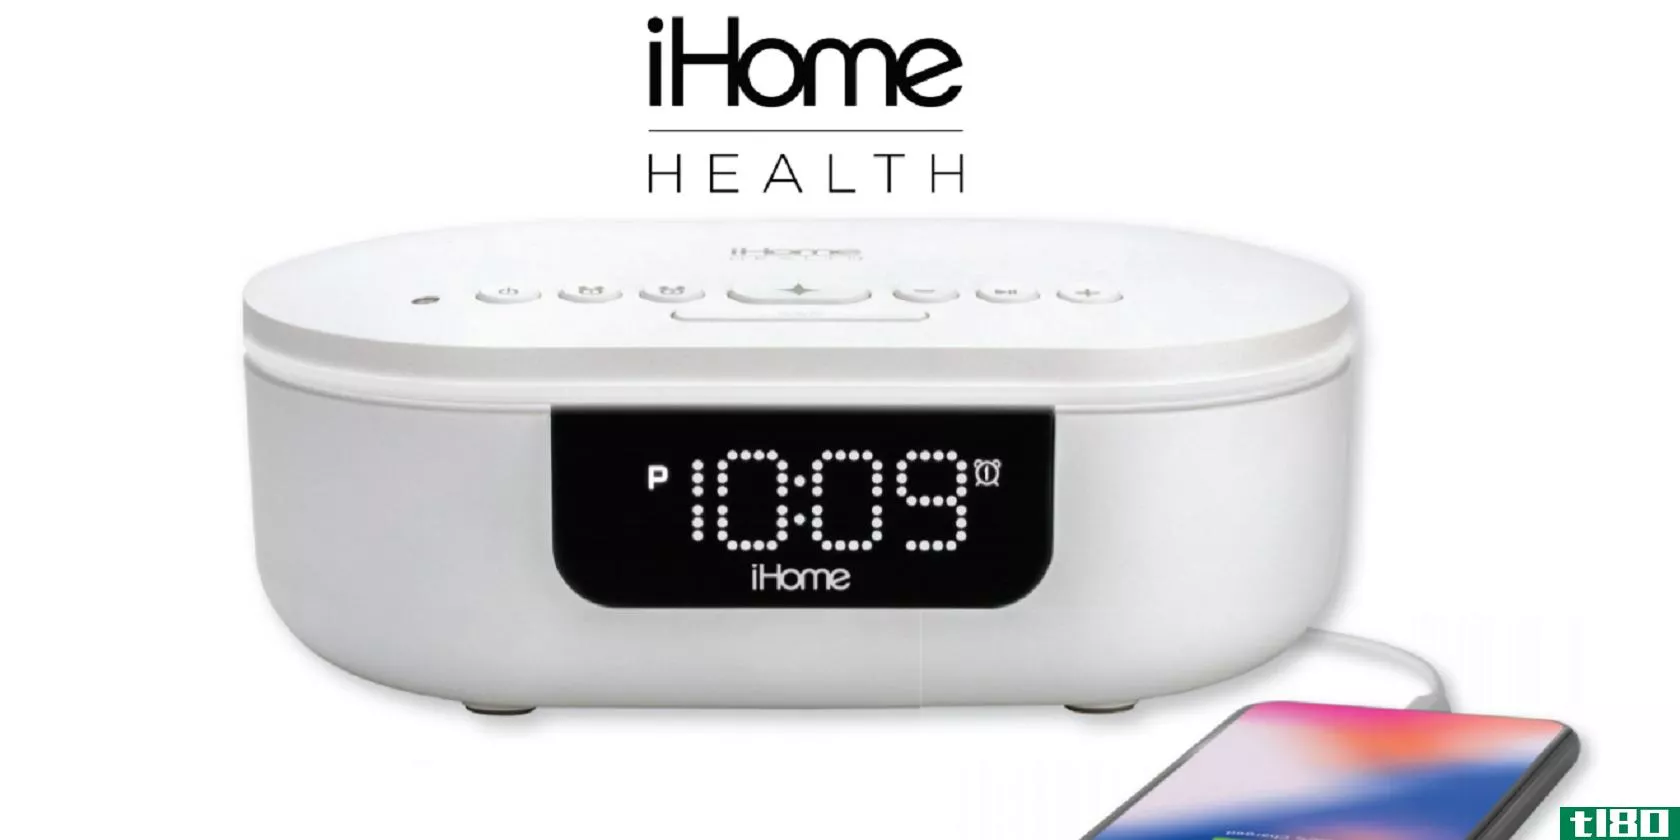 ihome ces 2021